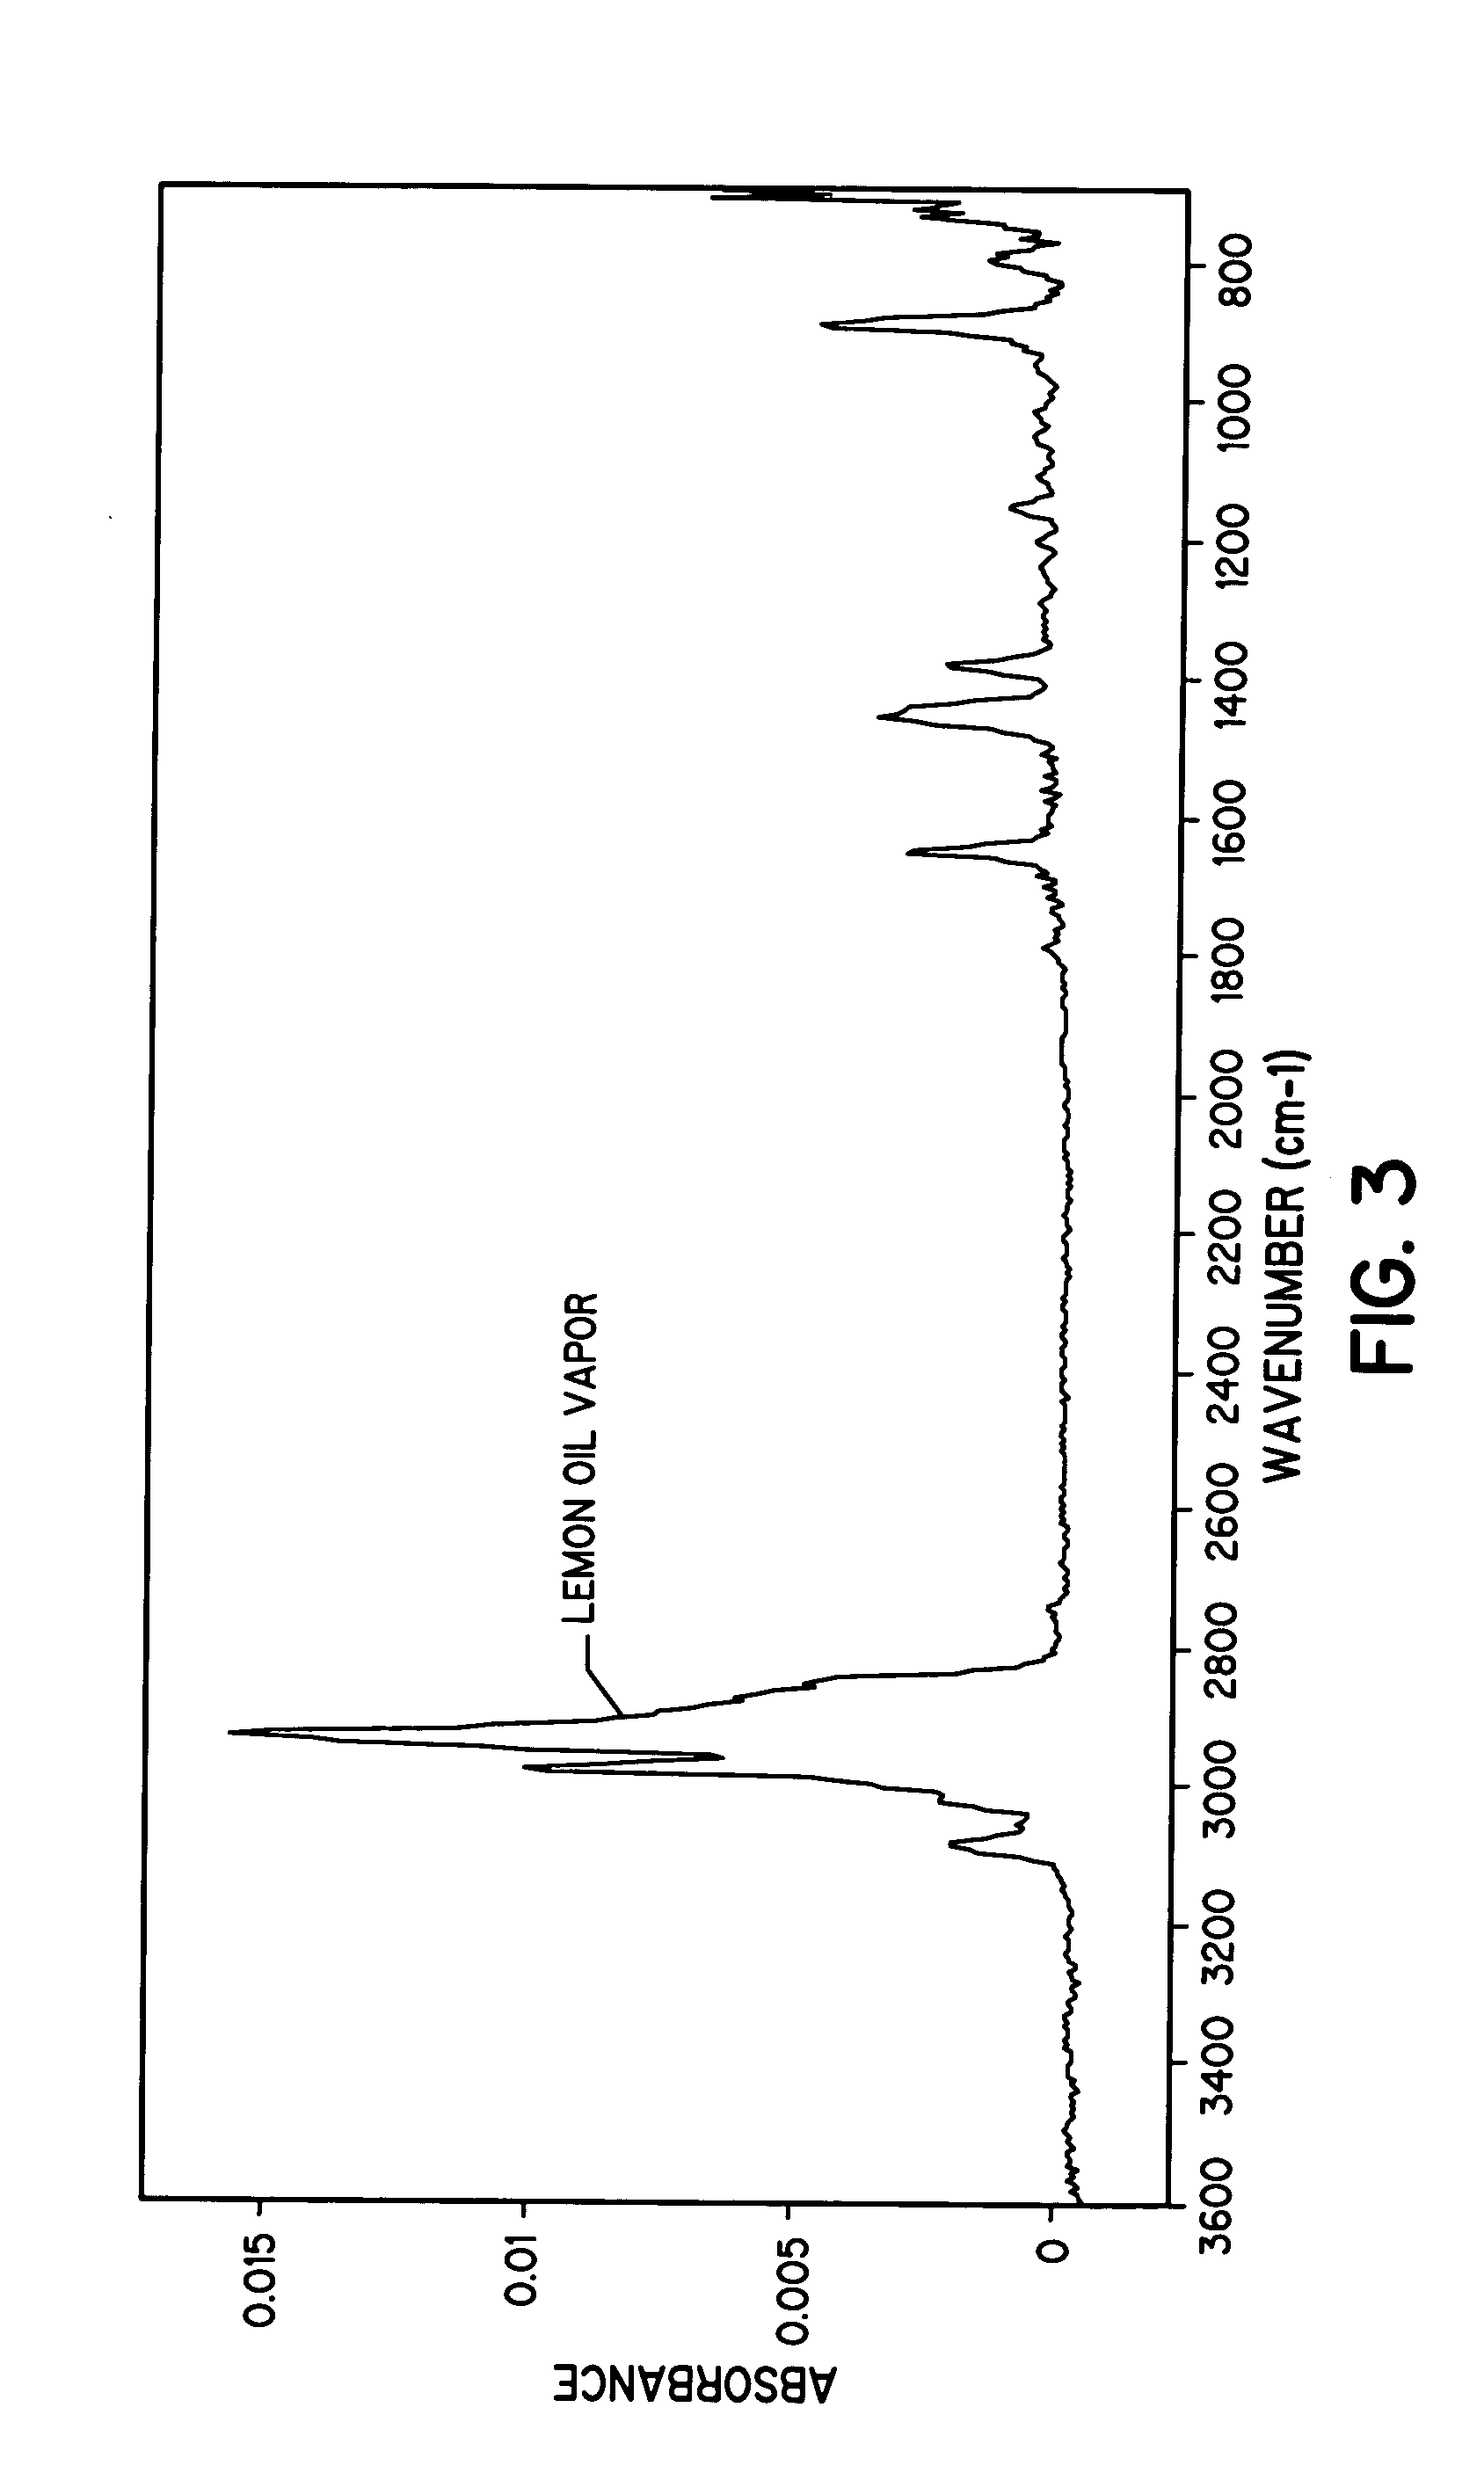 Method of measuring volatile components of foods